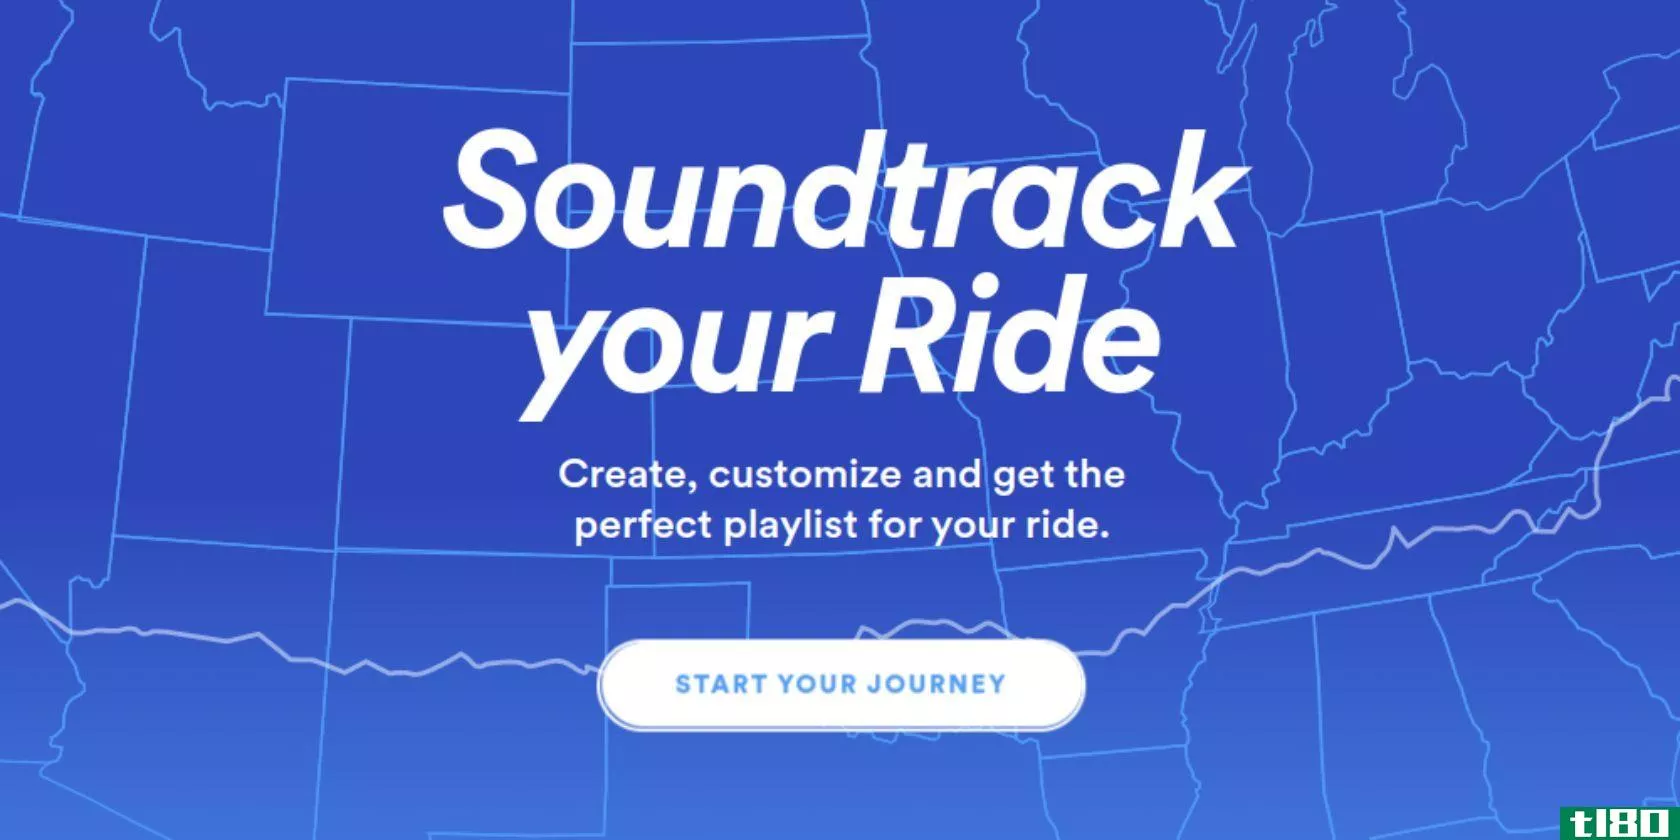 spotify-soundtrack-your-ride-2